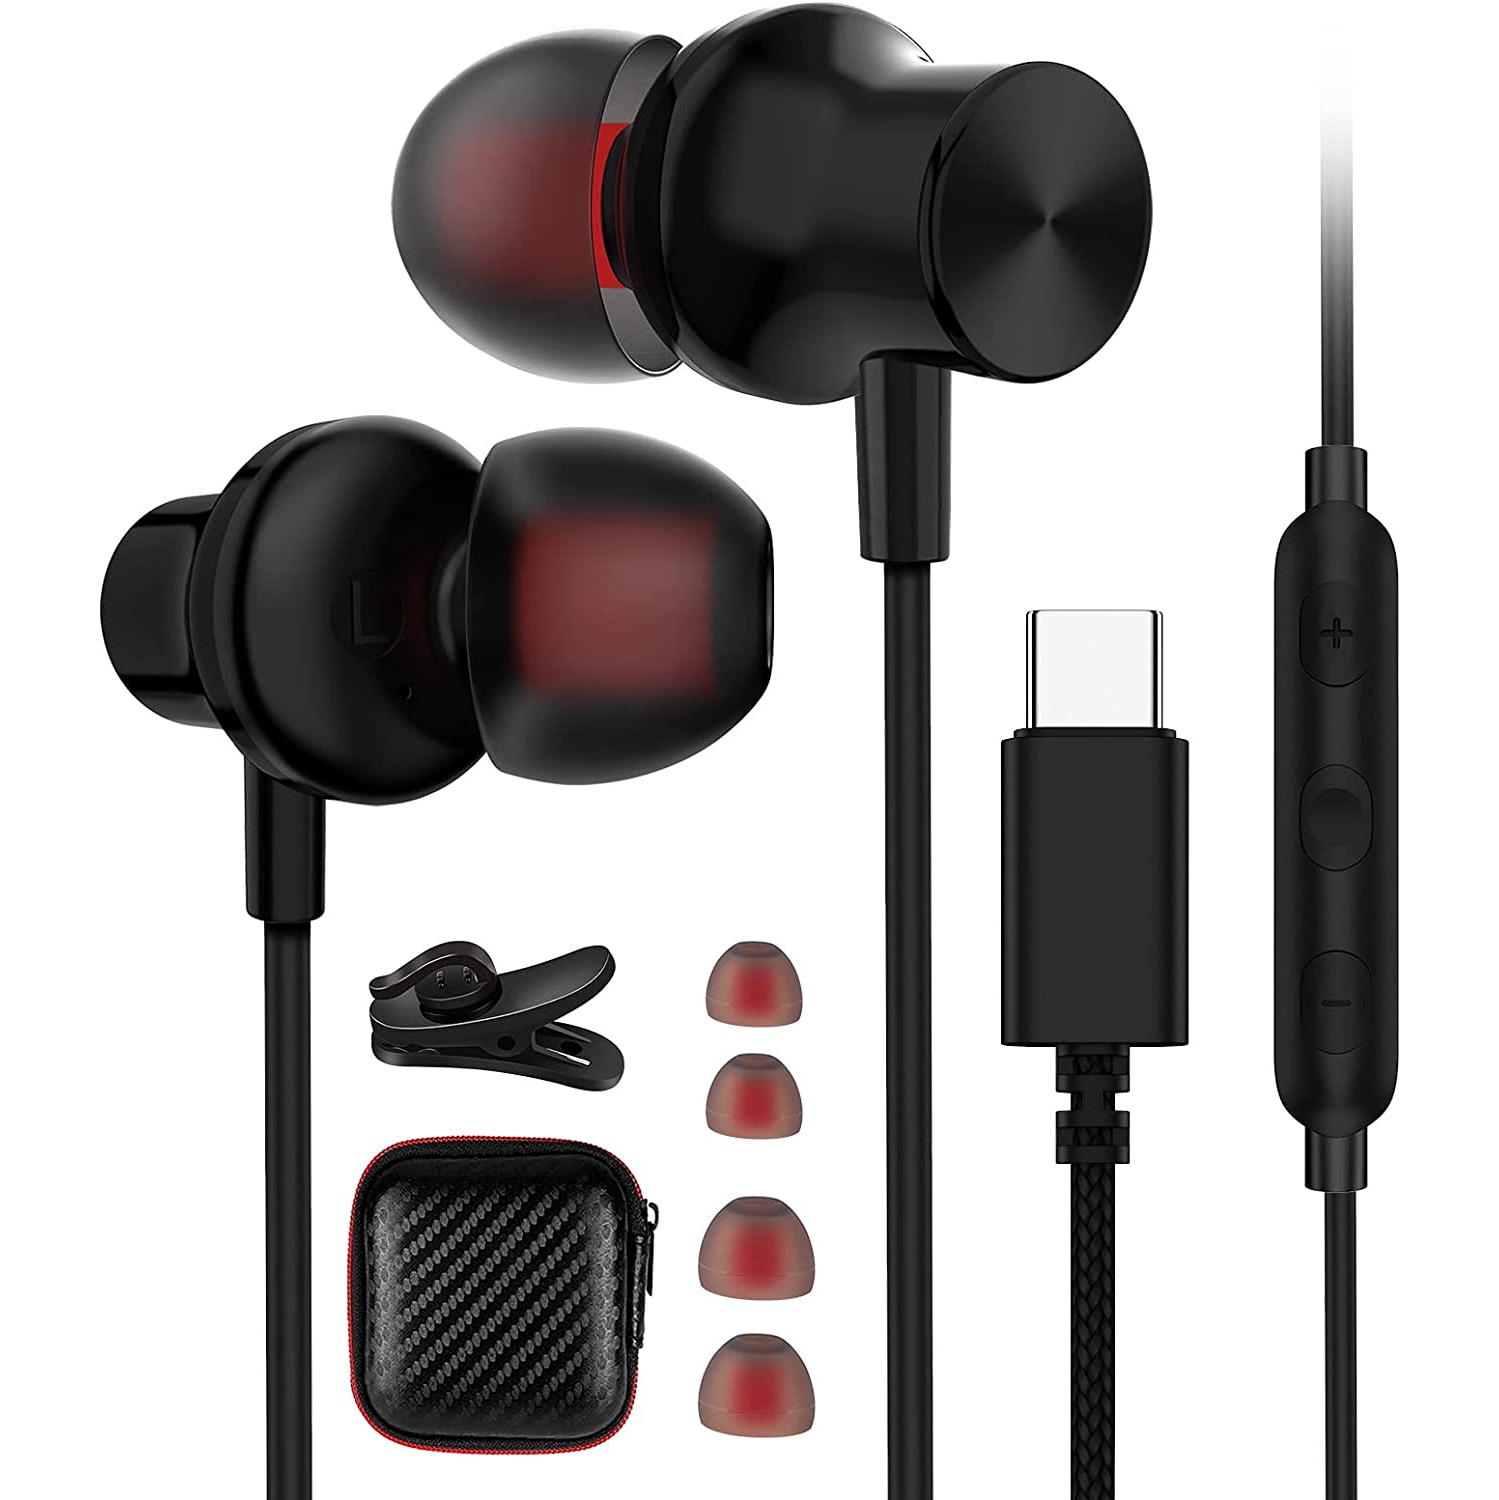 Dolaer USB C Headphones, Wired Earbuds for Samsung S21 S20 FE Noise Cancelling Earphones Type C Headphone with Mic HiFi Stereo Headsets for iPad Pro Galaxy Note 20 Ultra OnePlus 9